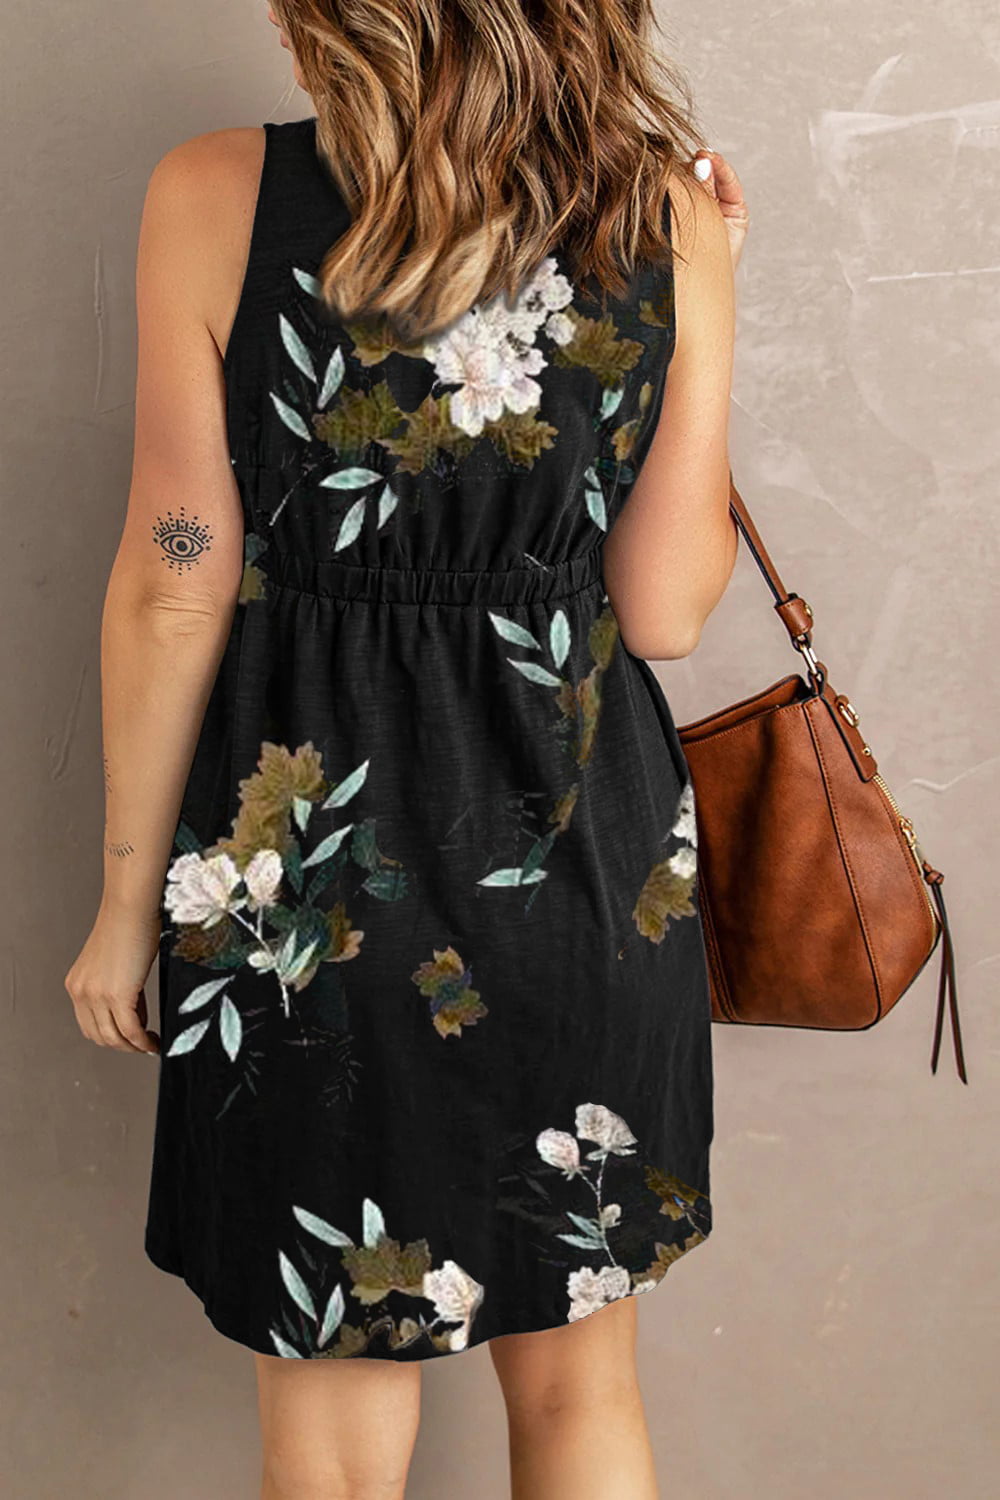 Get trendy with Double Take Printed Scoop Neck Sleeveless Buttoned Magic Dress with Pockets - Dress available at Styles Code. Grab yours today!